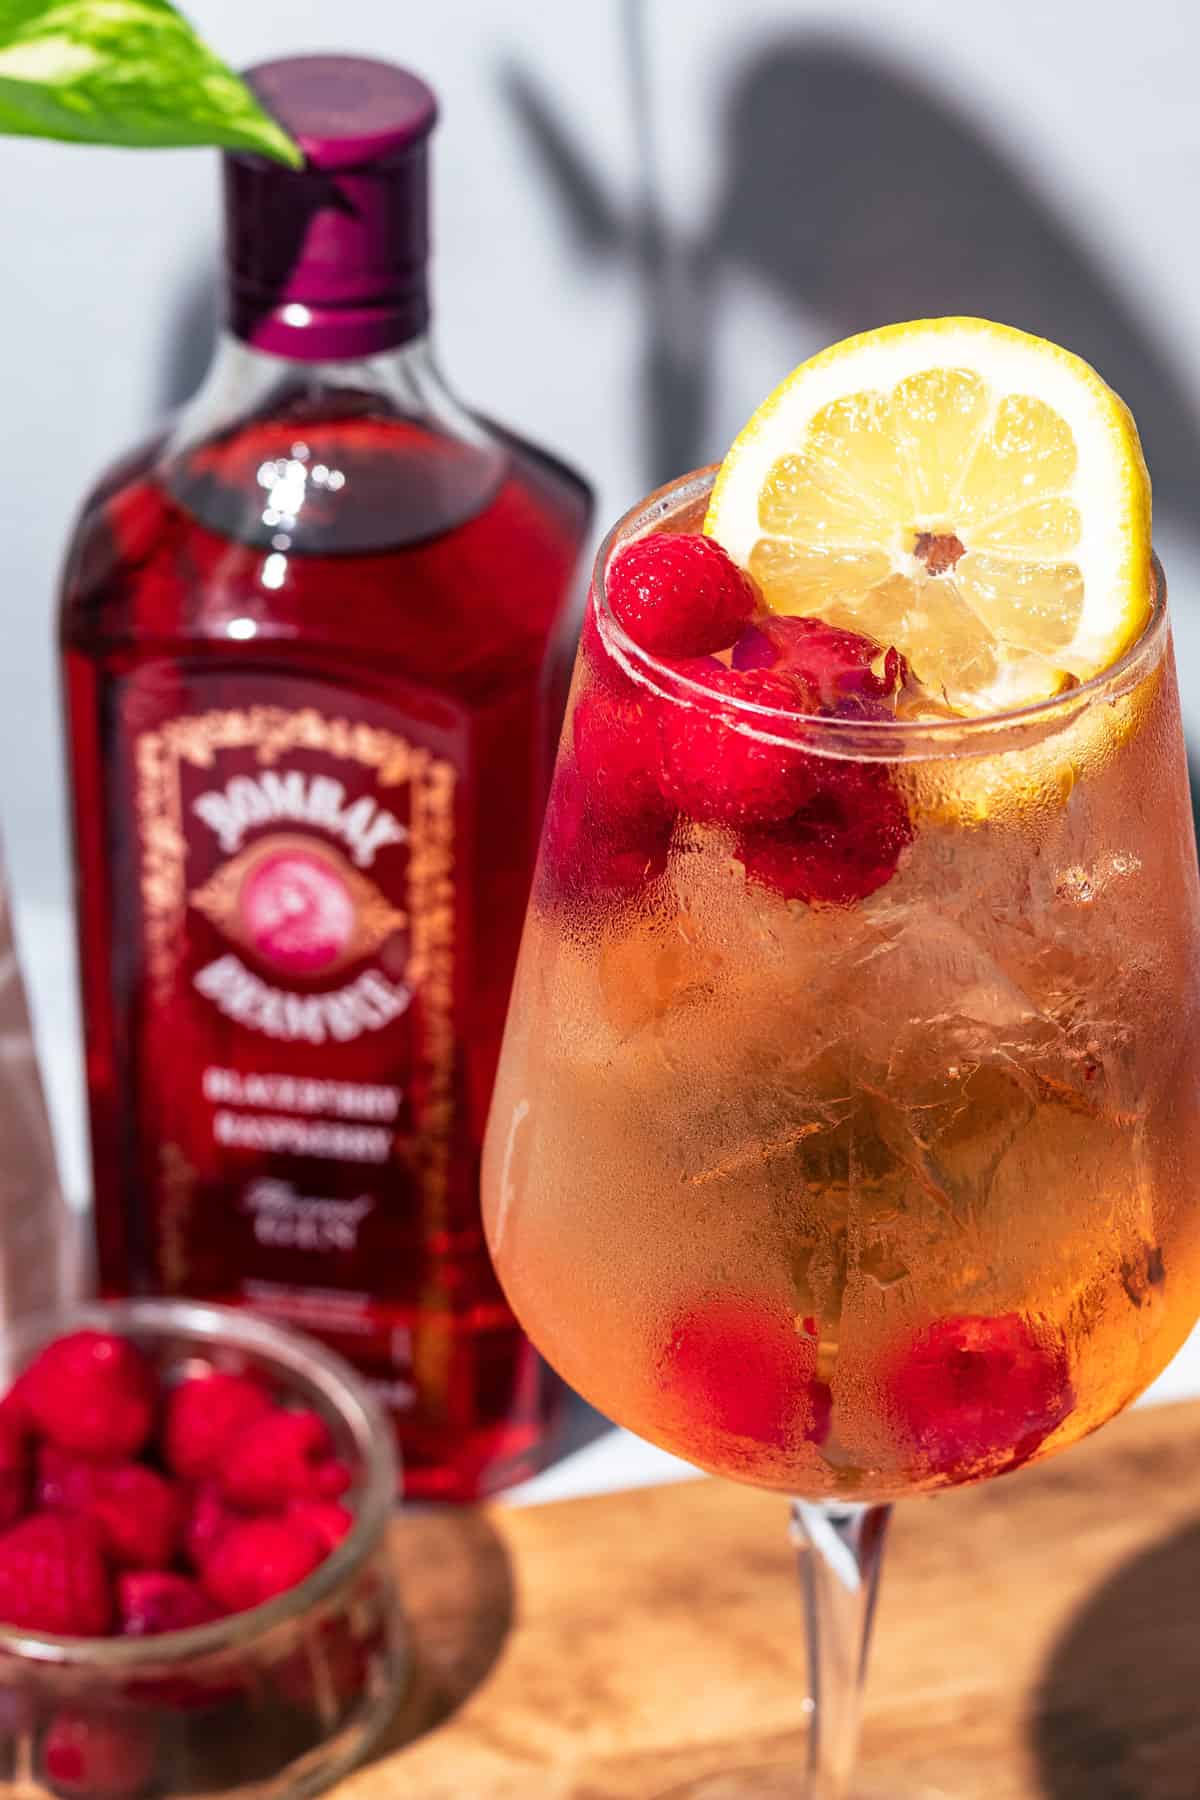 Spritz garnished with a lemon slice and raspberries.